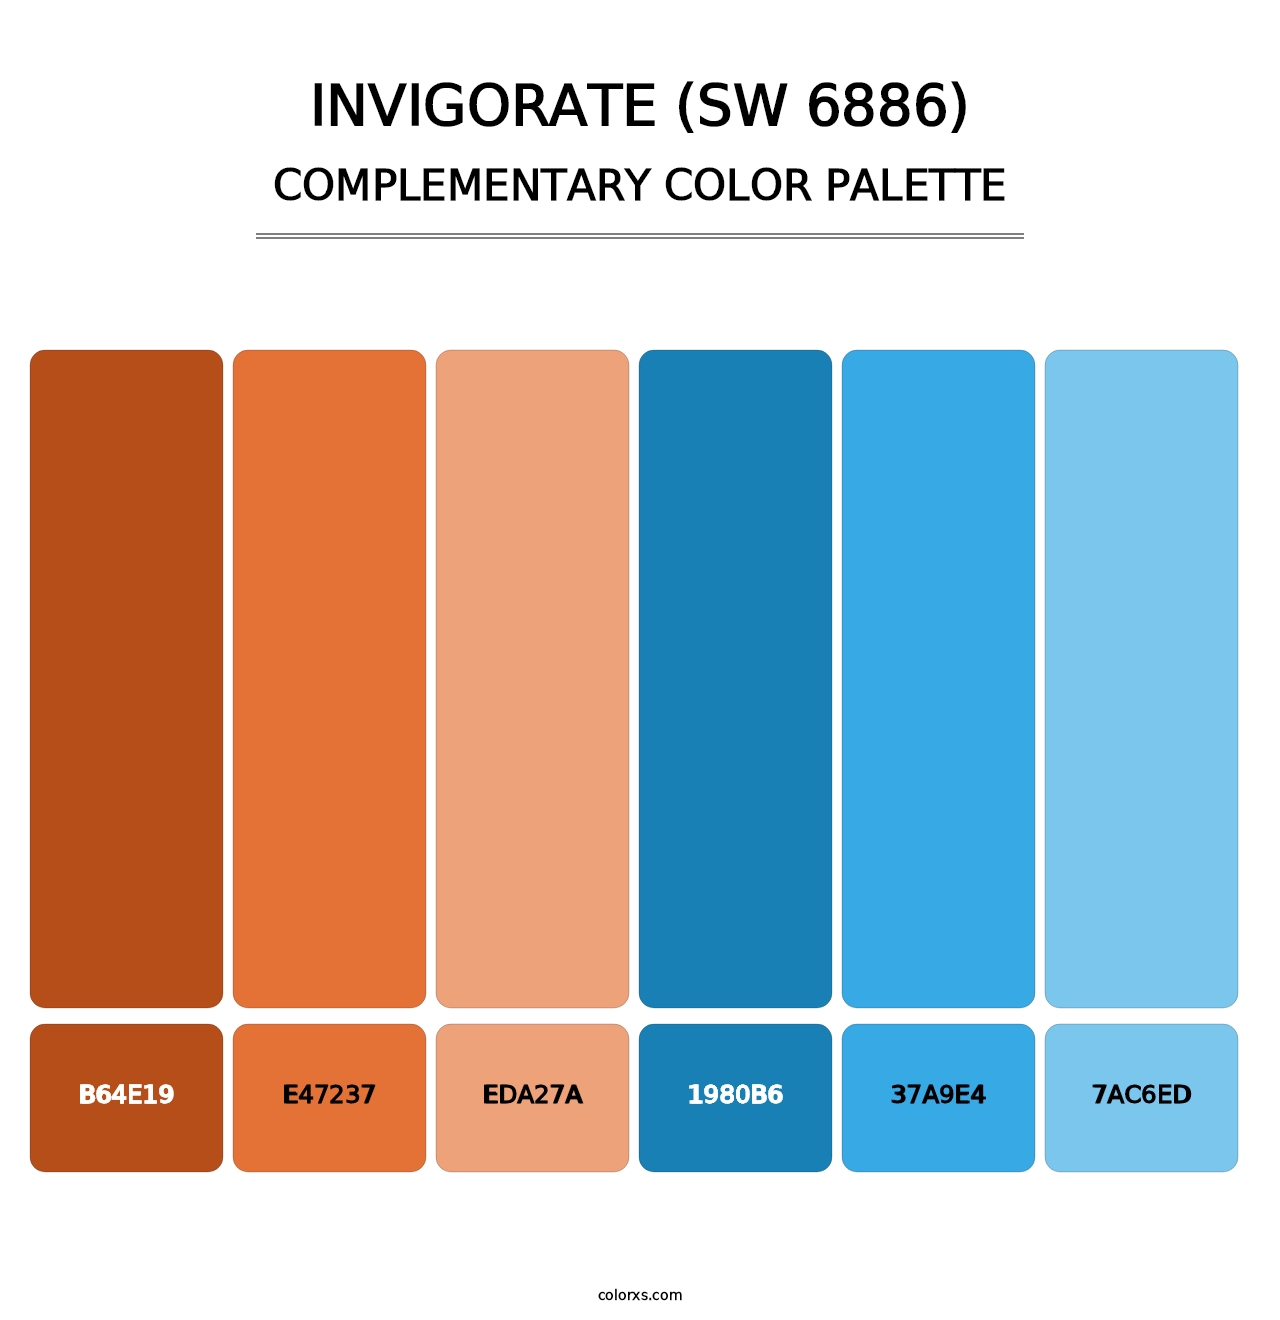 Invigorate (SW 6886) - Complementary Color Palette